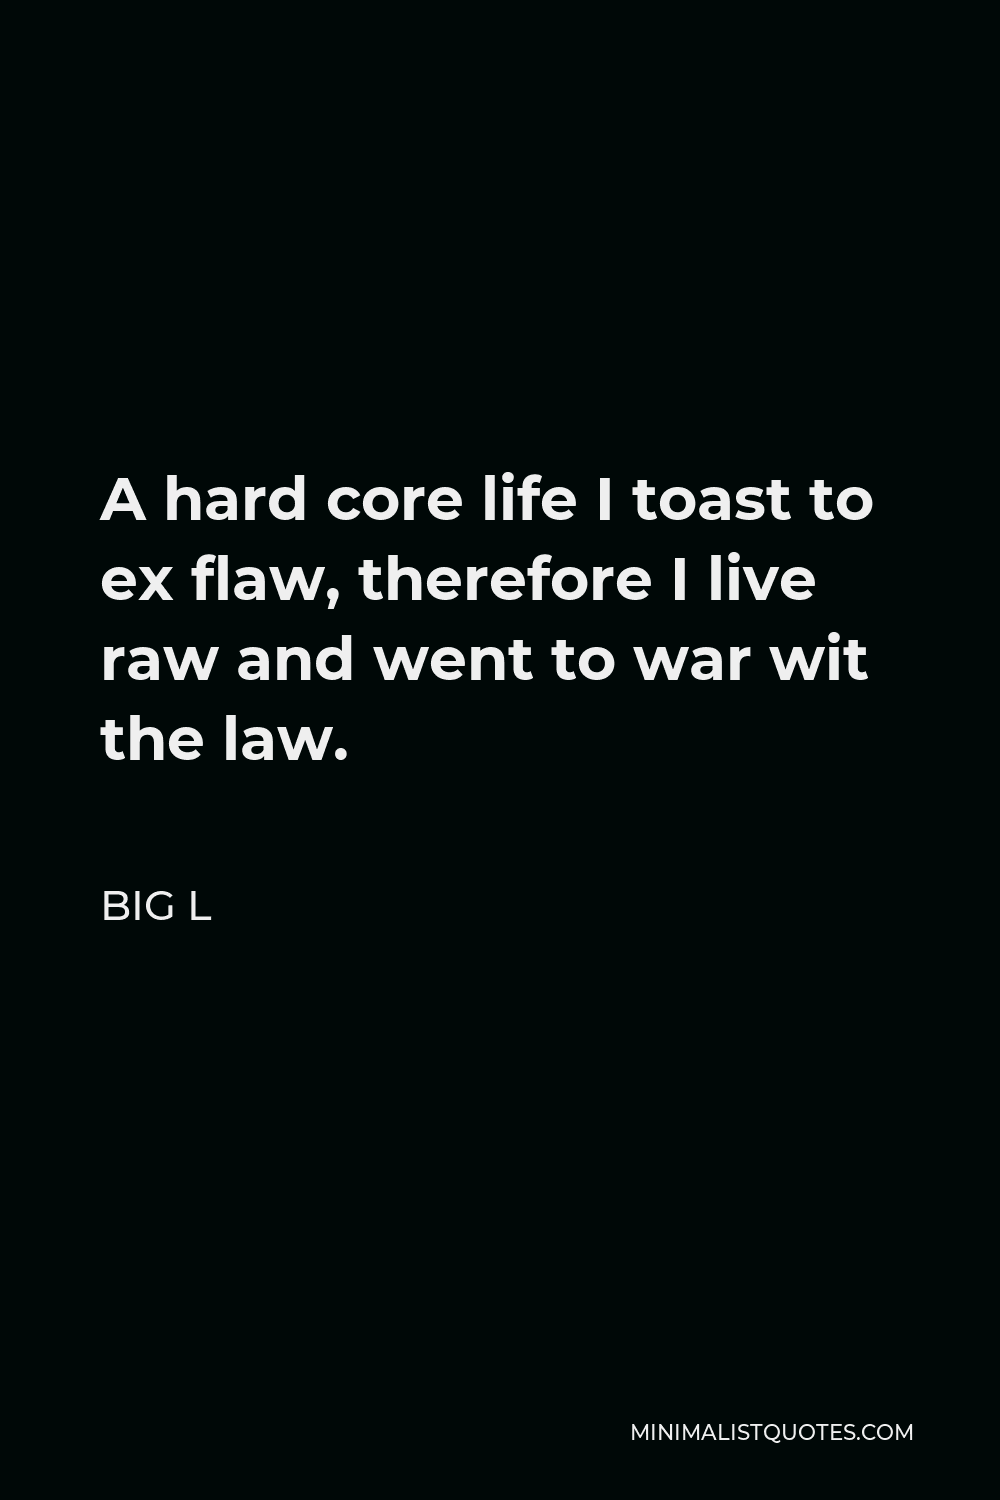 Big L Quote - A hard core life I toast to ex flaw, therefore I live raw and went to war wit the law.